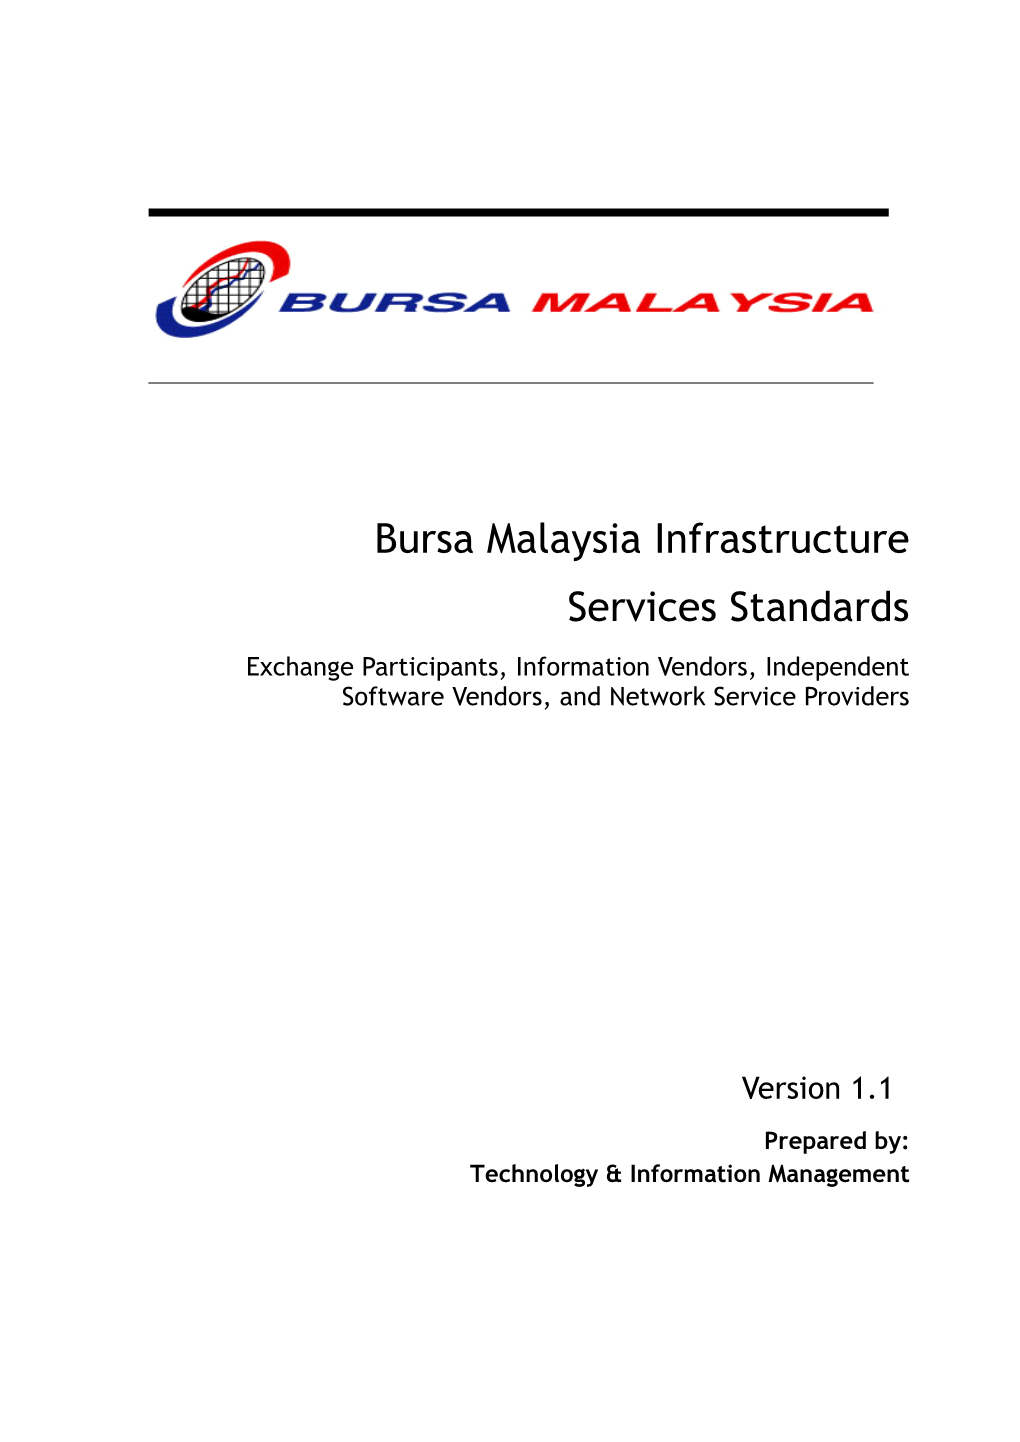 Bursa Malaysia Infrastructure Services Standards Exchange Participants, Information Vendors, Independent Software Vendors, and Network Service Providers